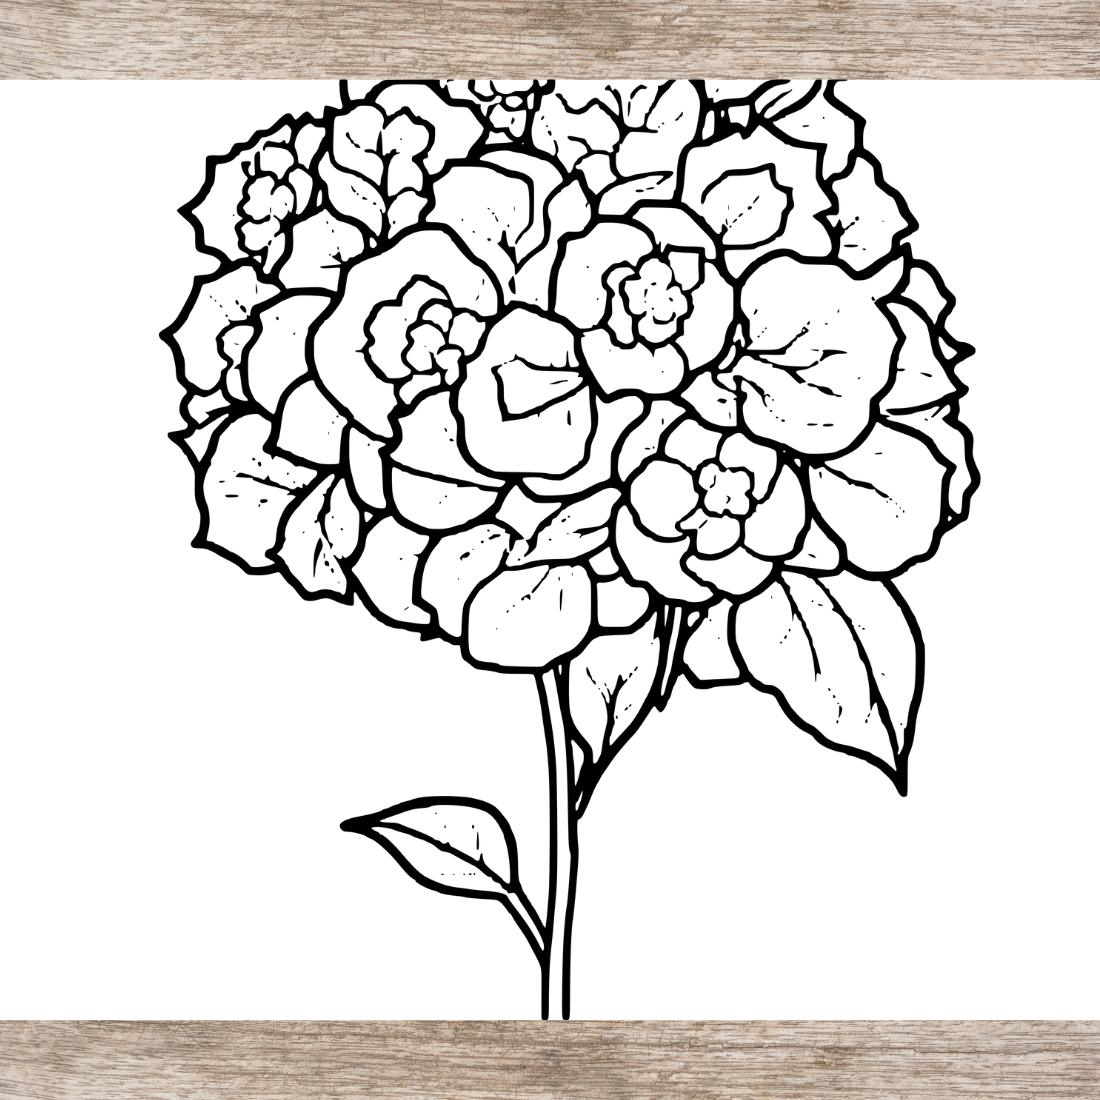 6 Flower Drawing Floral Coloring Pages For Adults (SVG and PNG) preview image.